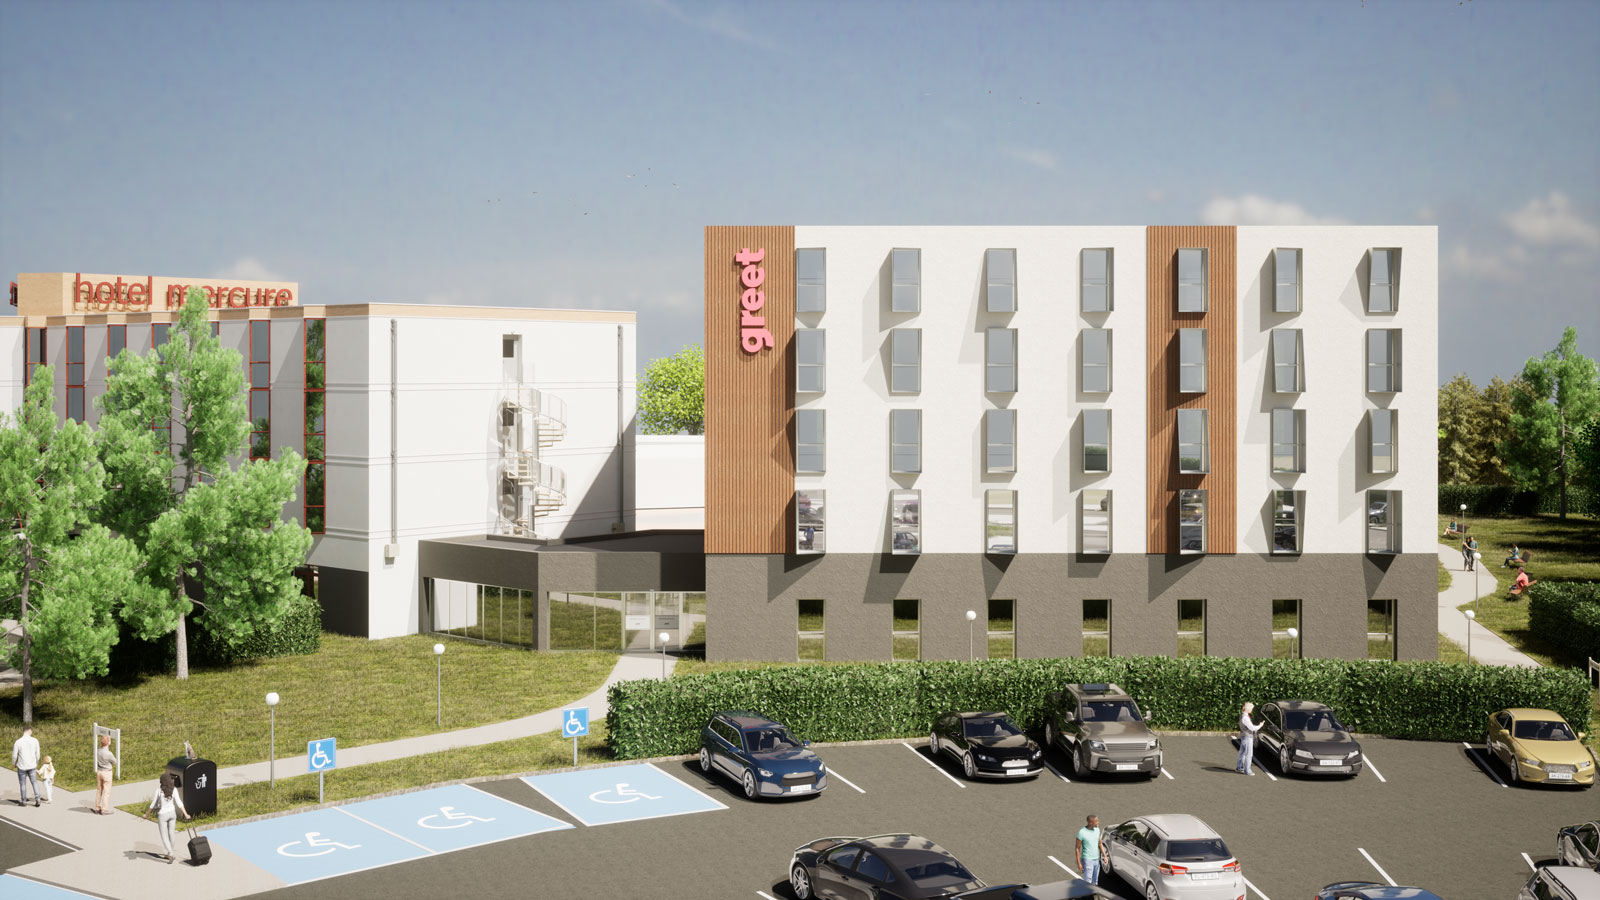 Construction-hotel-Greet-projet-architectural-realisation-area-creatio-groupe-ameo